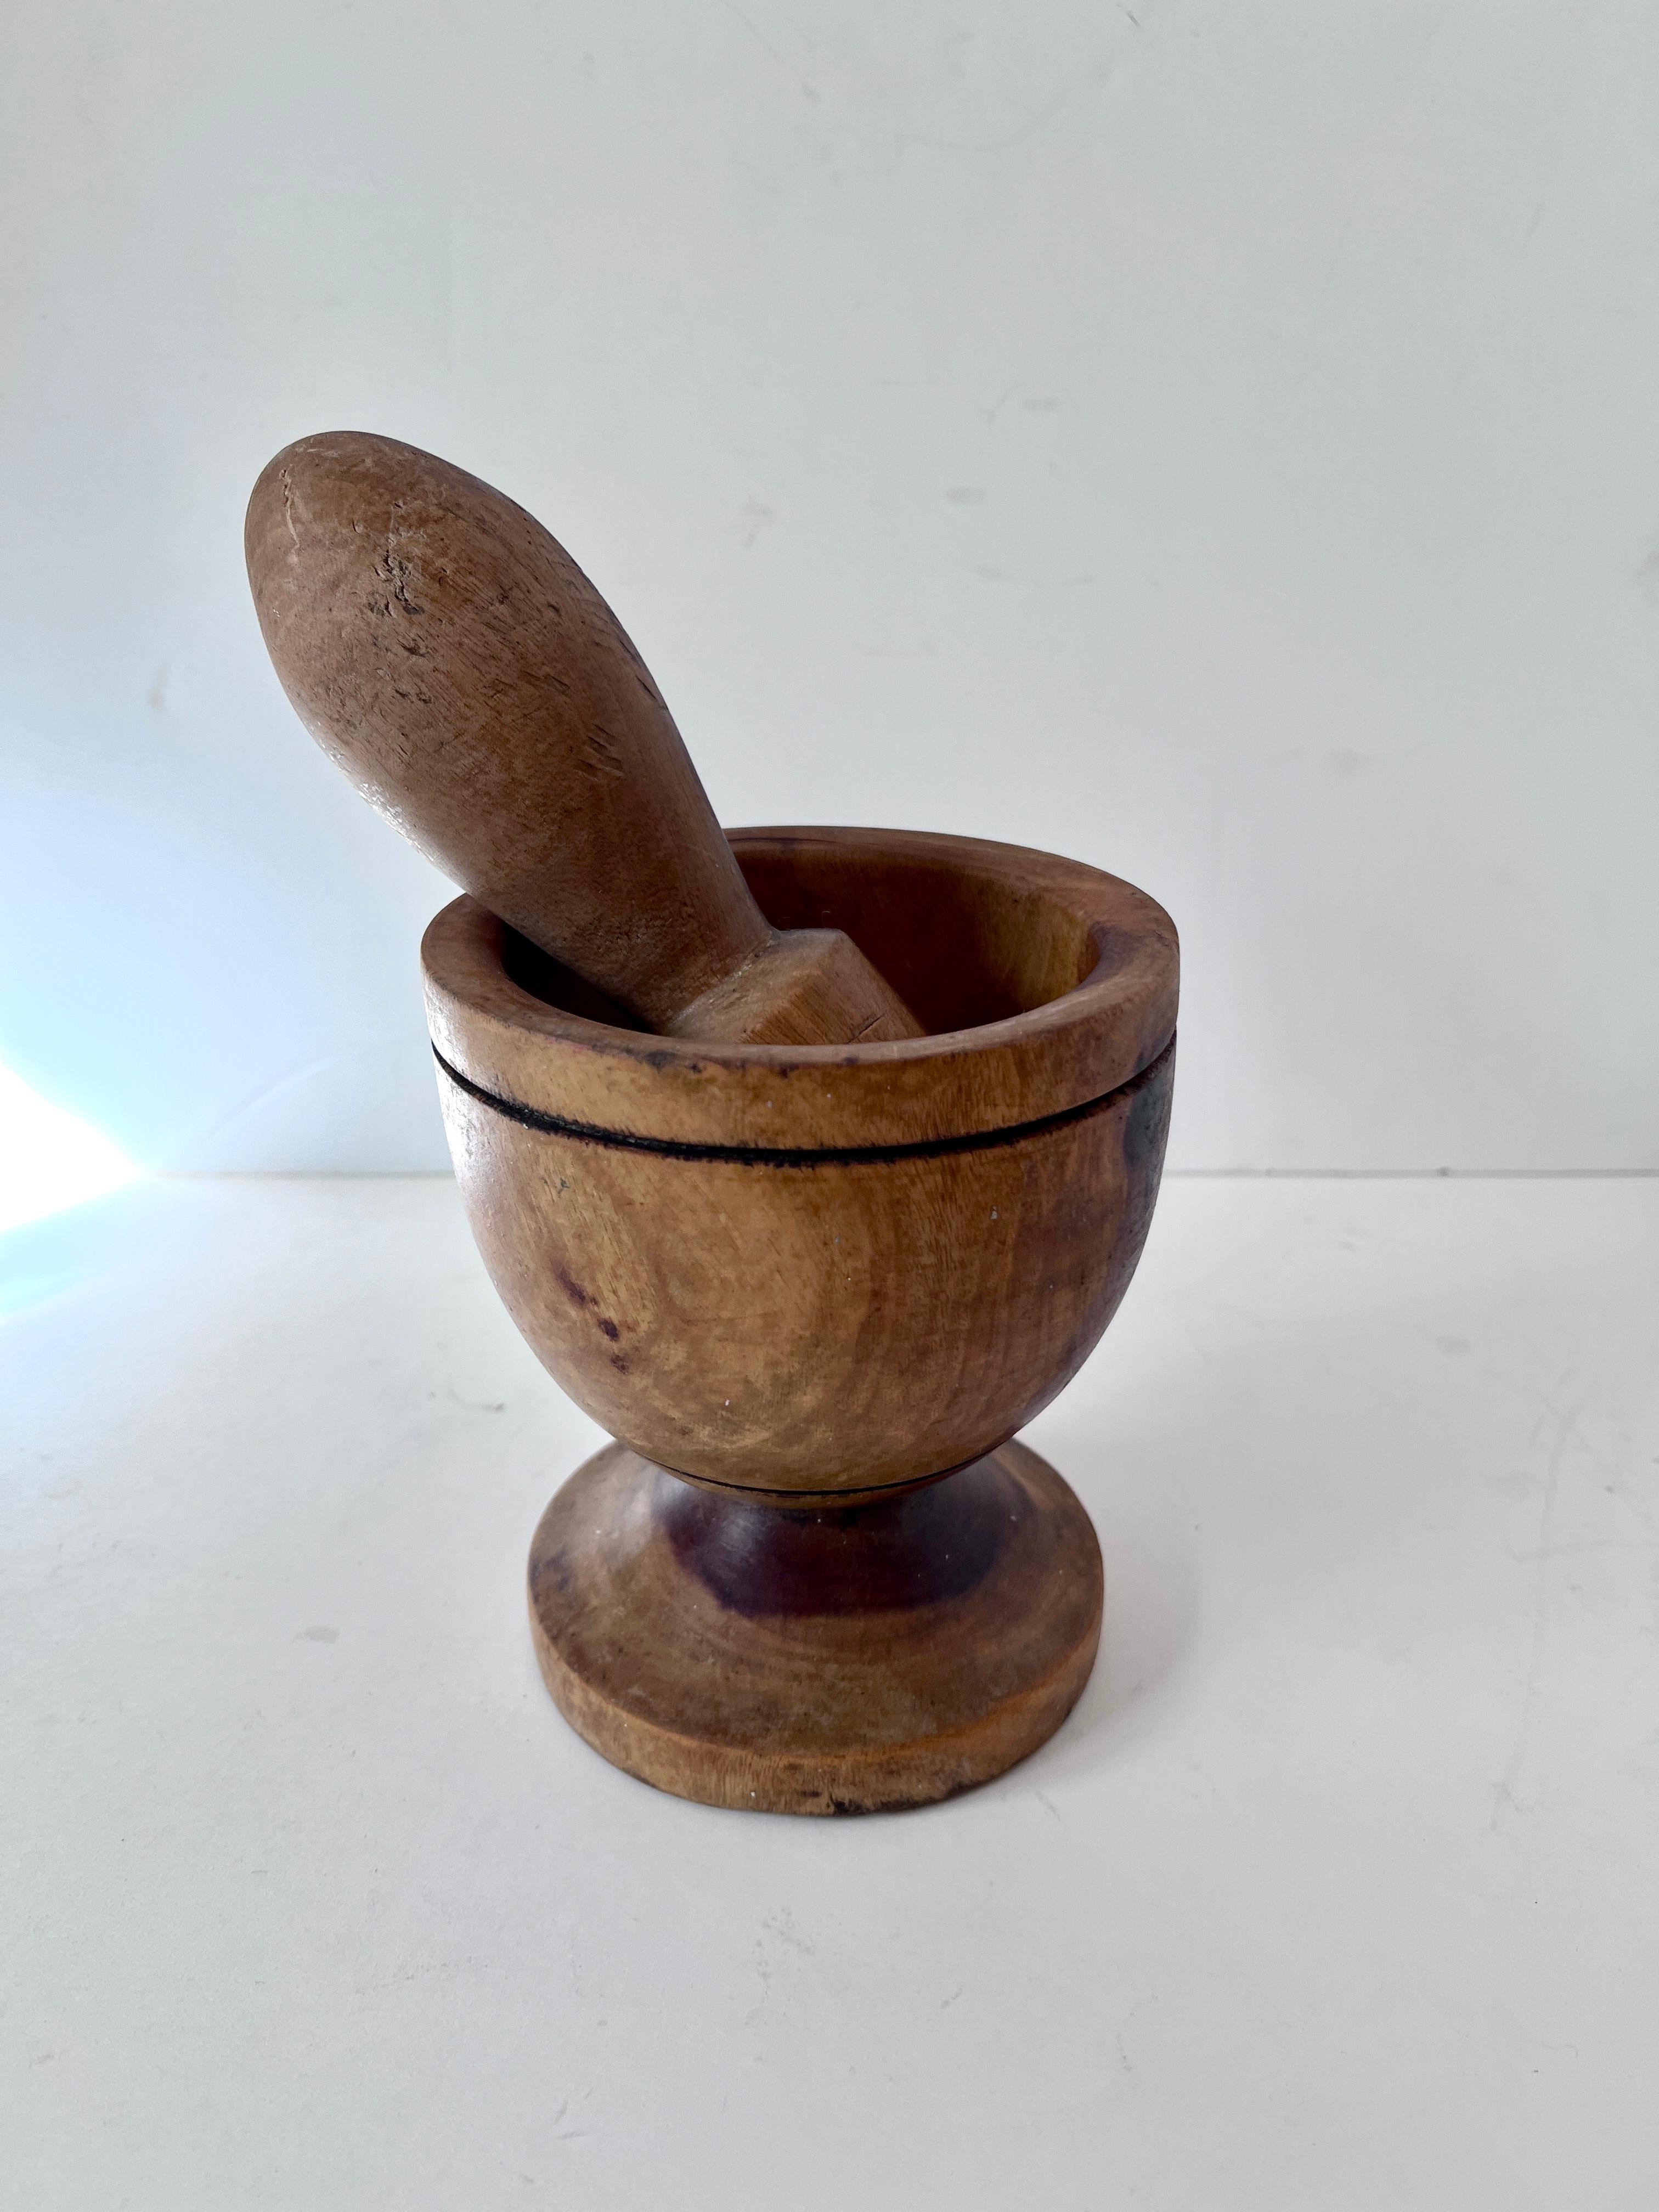 A well crafted wooden Folk Art Mortar and Pestle.  The piece is used for crushing everything from herbs and spices, to medicines.  While the piece is practical, the wooden craftsmanship makes it an equally Wonderful decorative piece.

when polished,